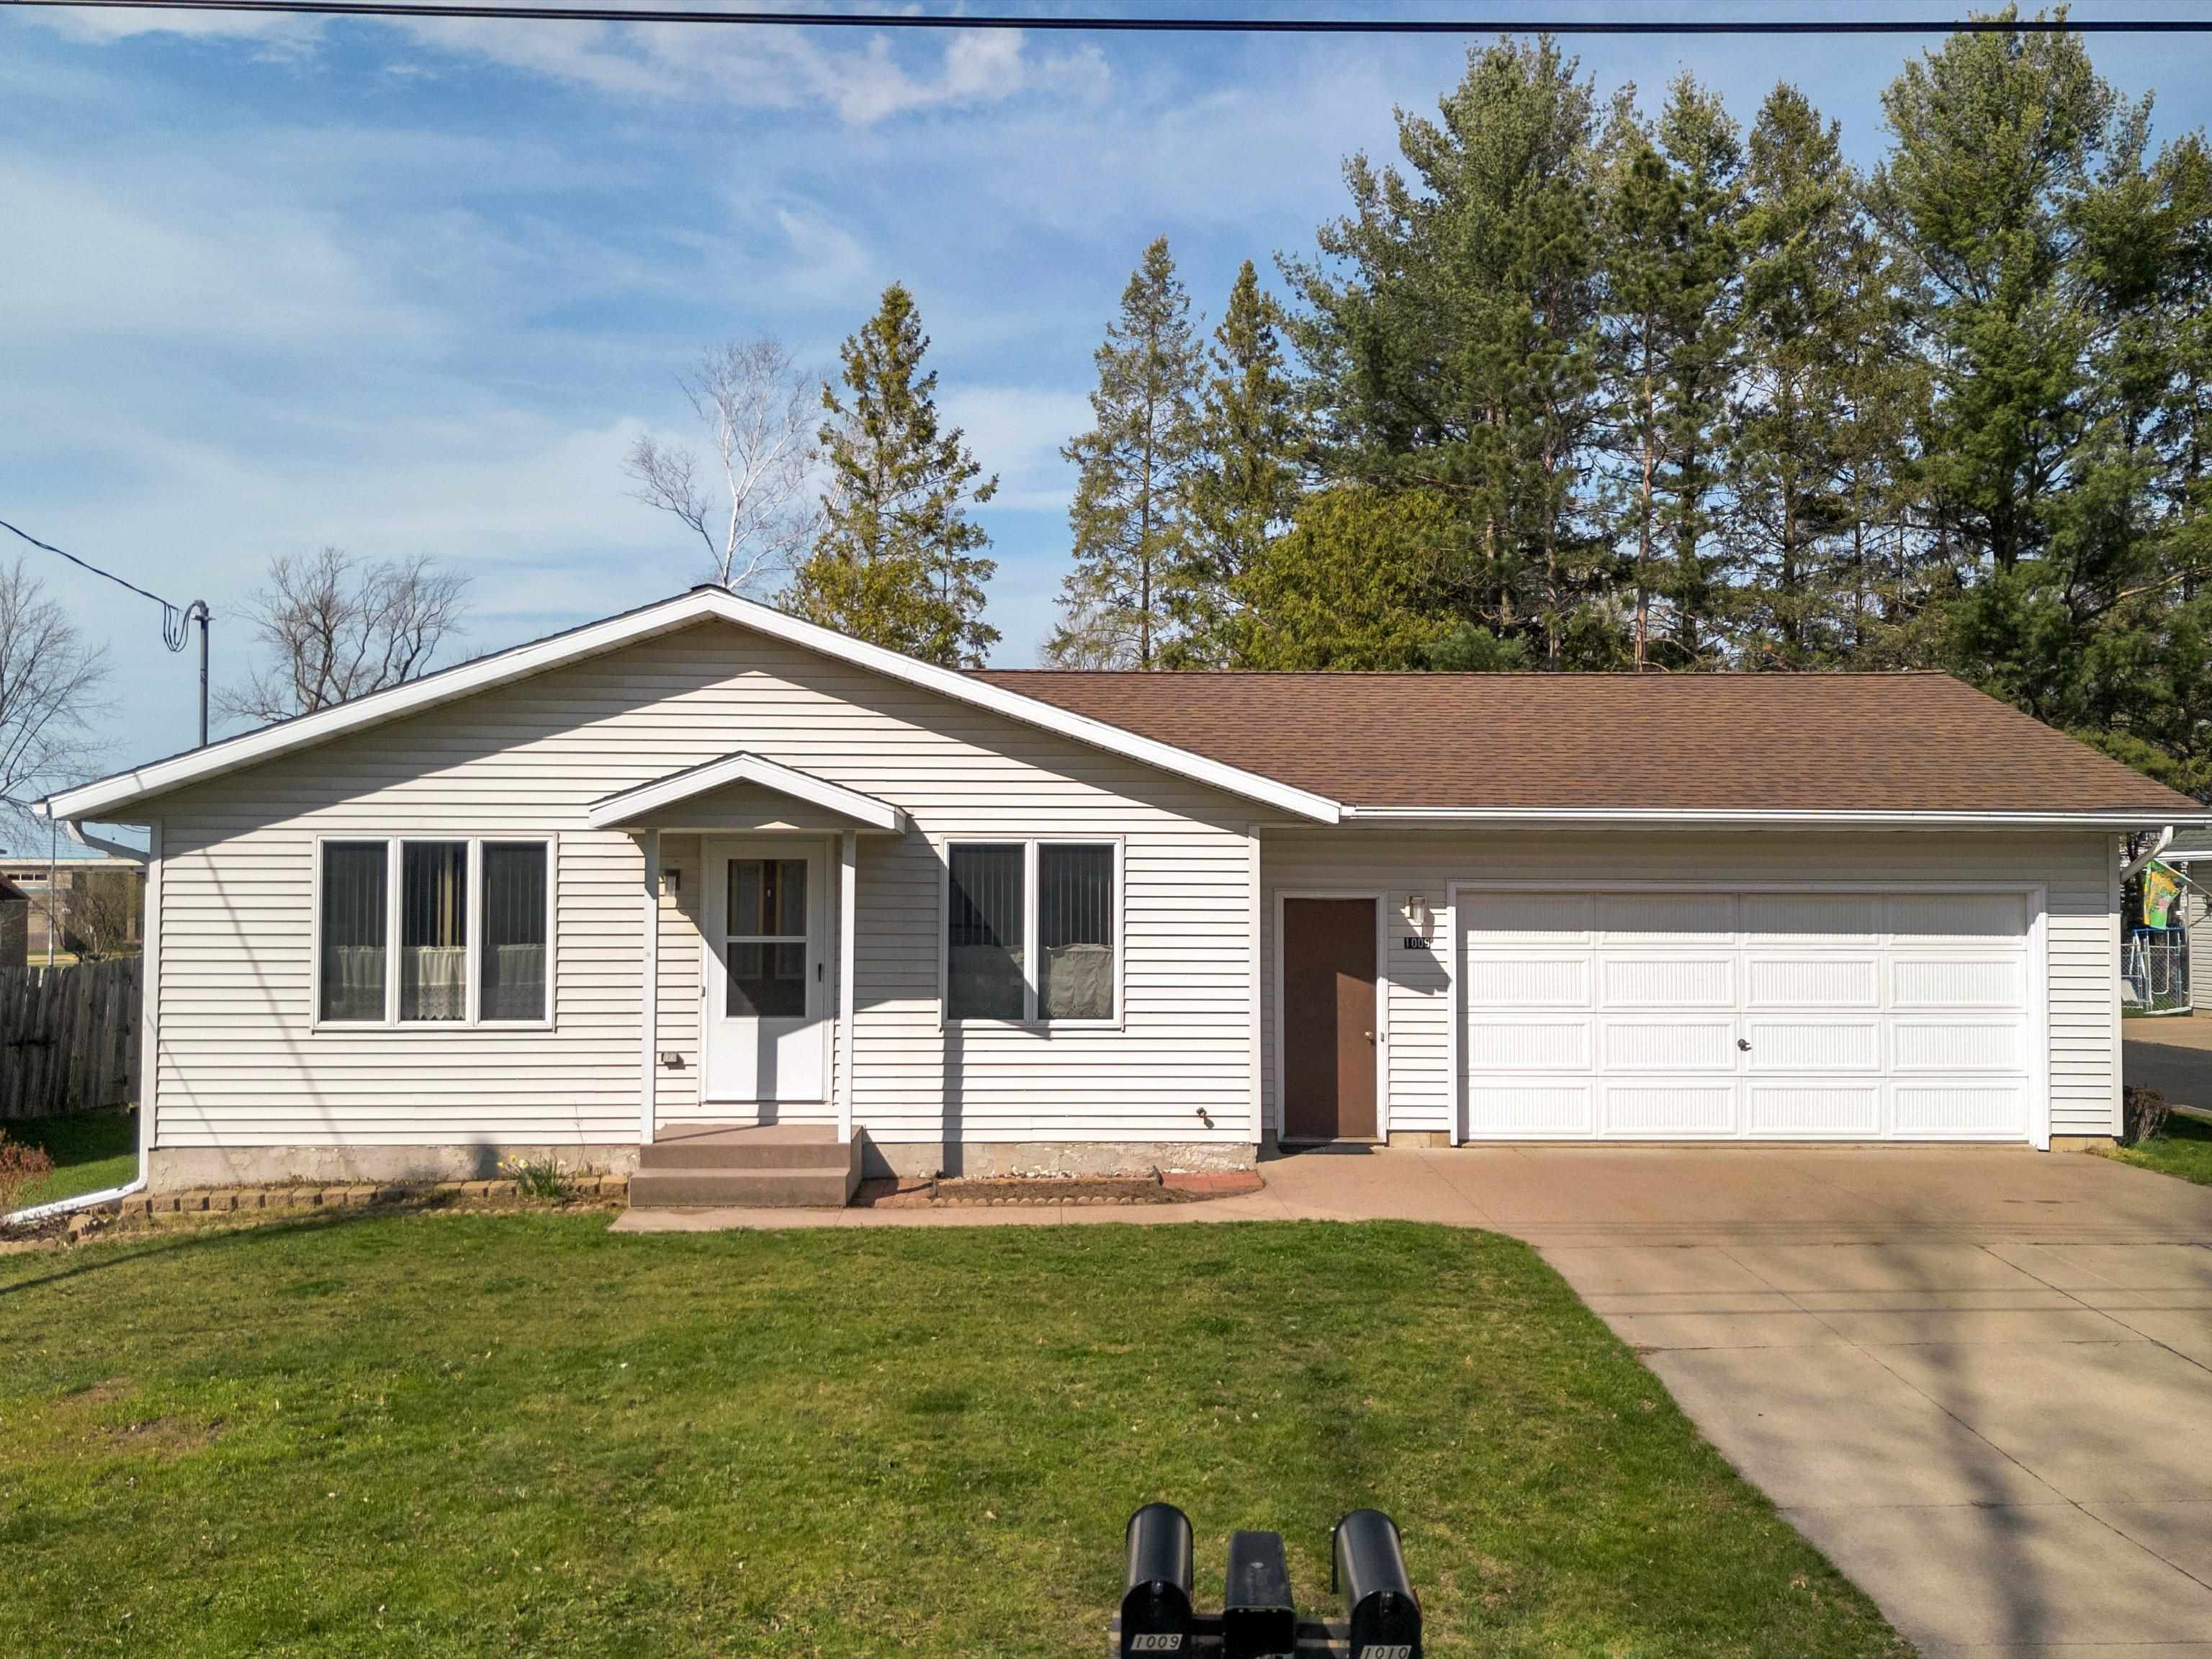 1009 E CLEVELAND STREET, Marshfield, Wisconsin 54449, 3 Bedrooms Bedrooms, ,2 BathroomsBathrooms,Residential,For Sale,1009 E CLEVELAND STREET,22401543